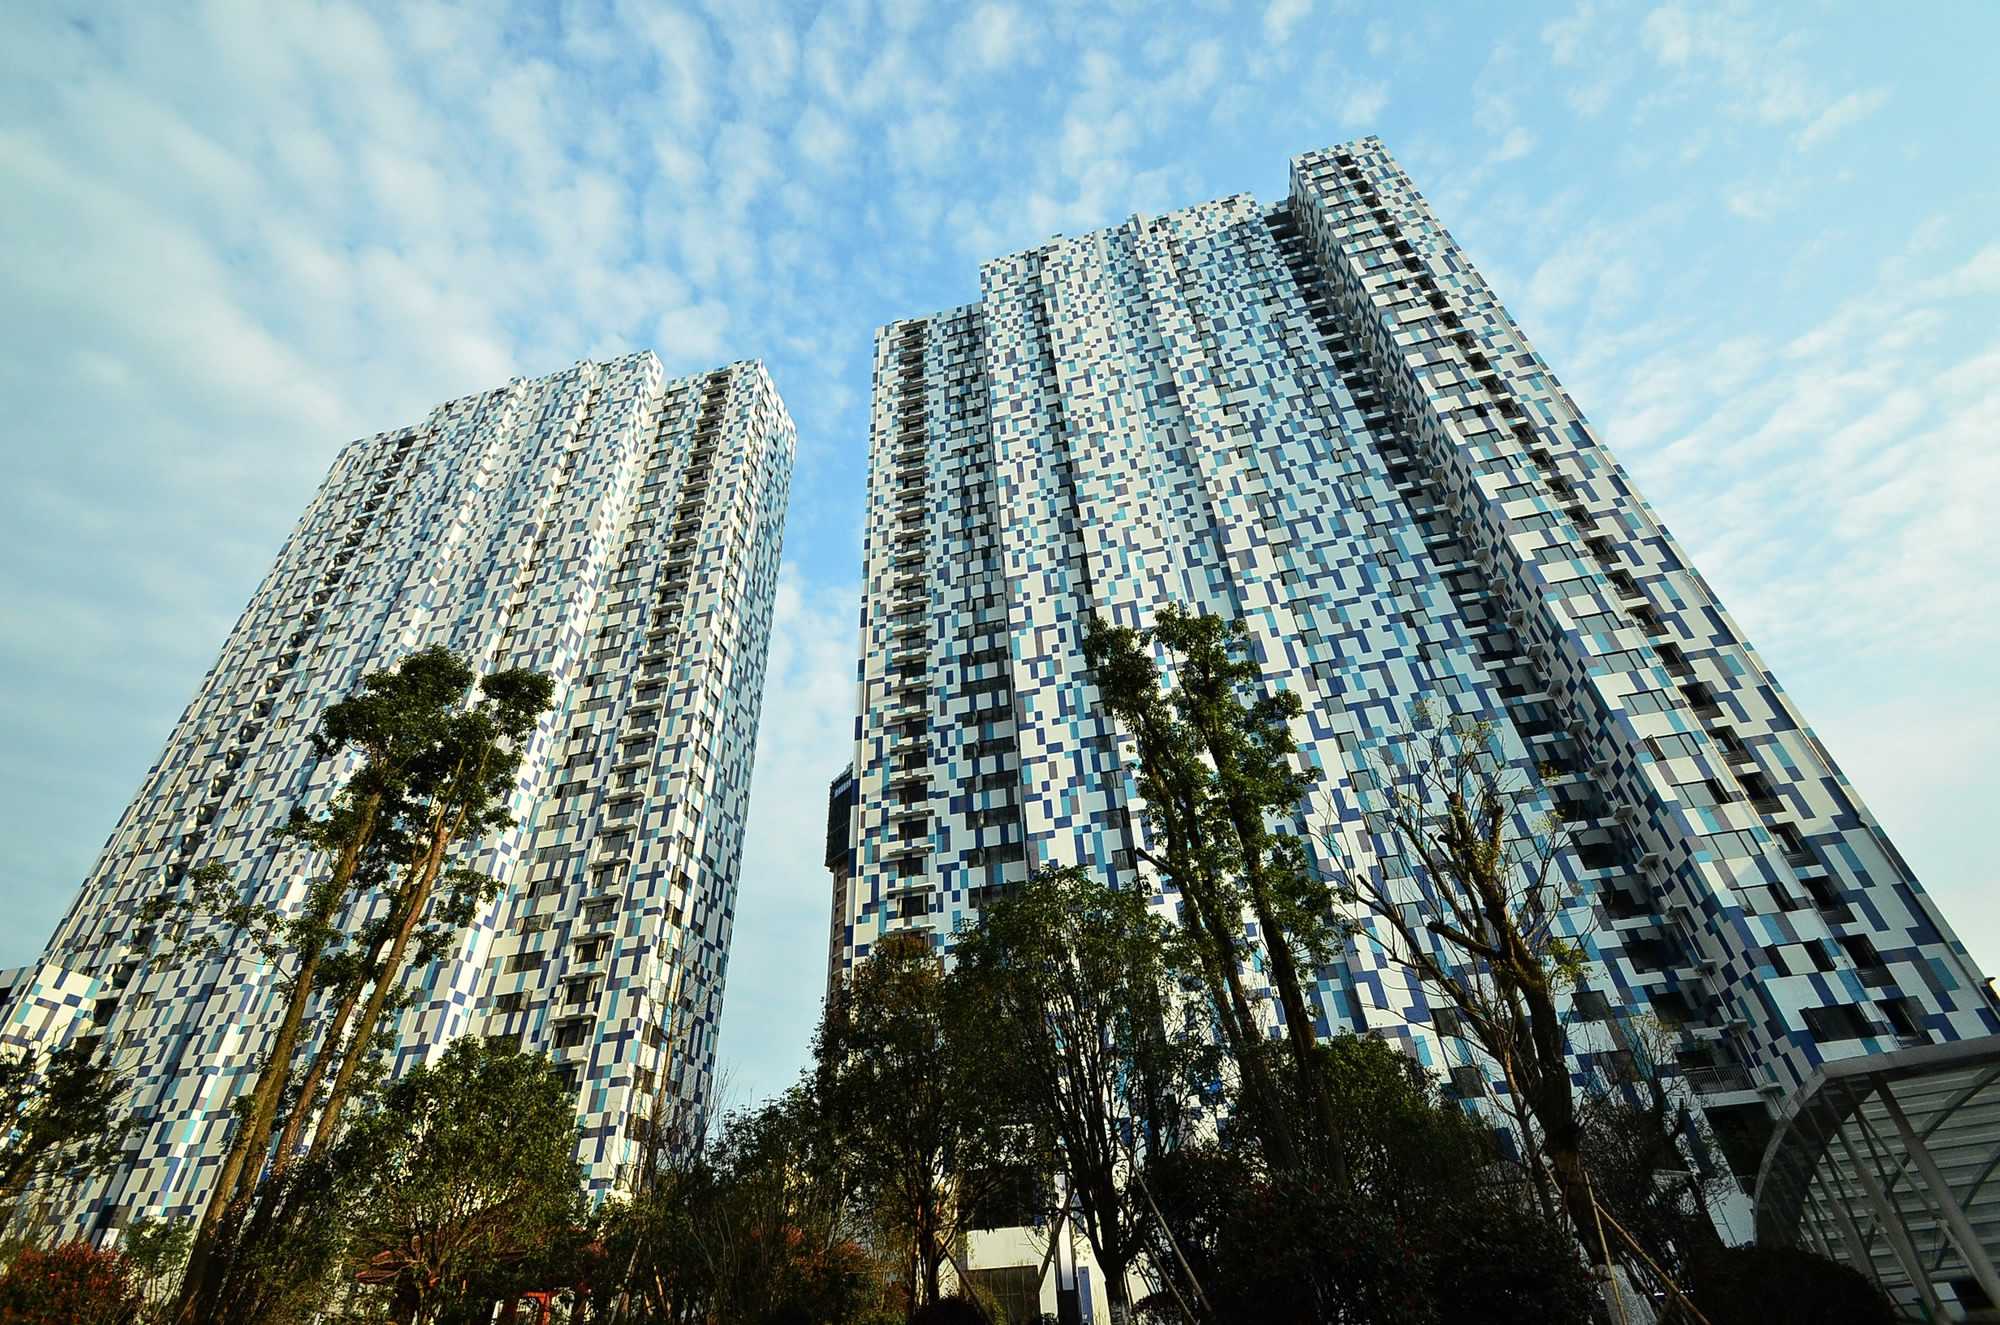 Dazzling “mosaic” buildings completed in Chenzhou, Hunan Province 